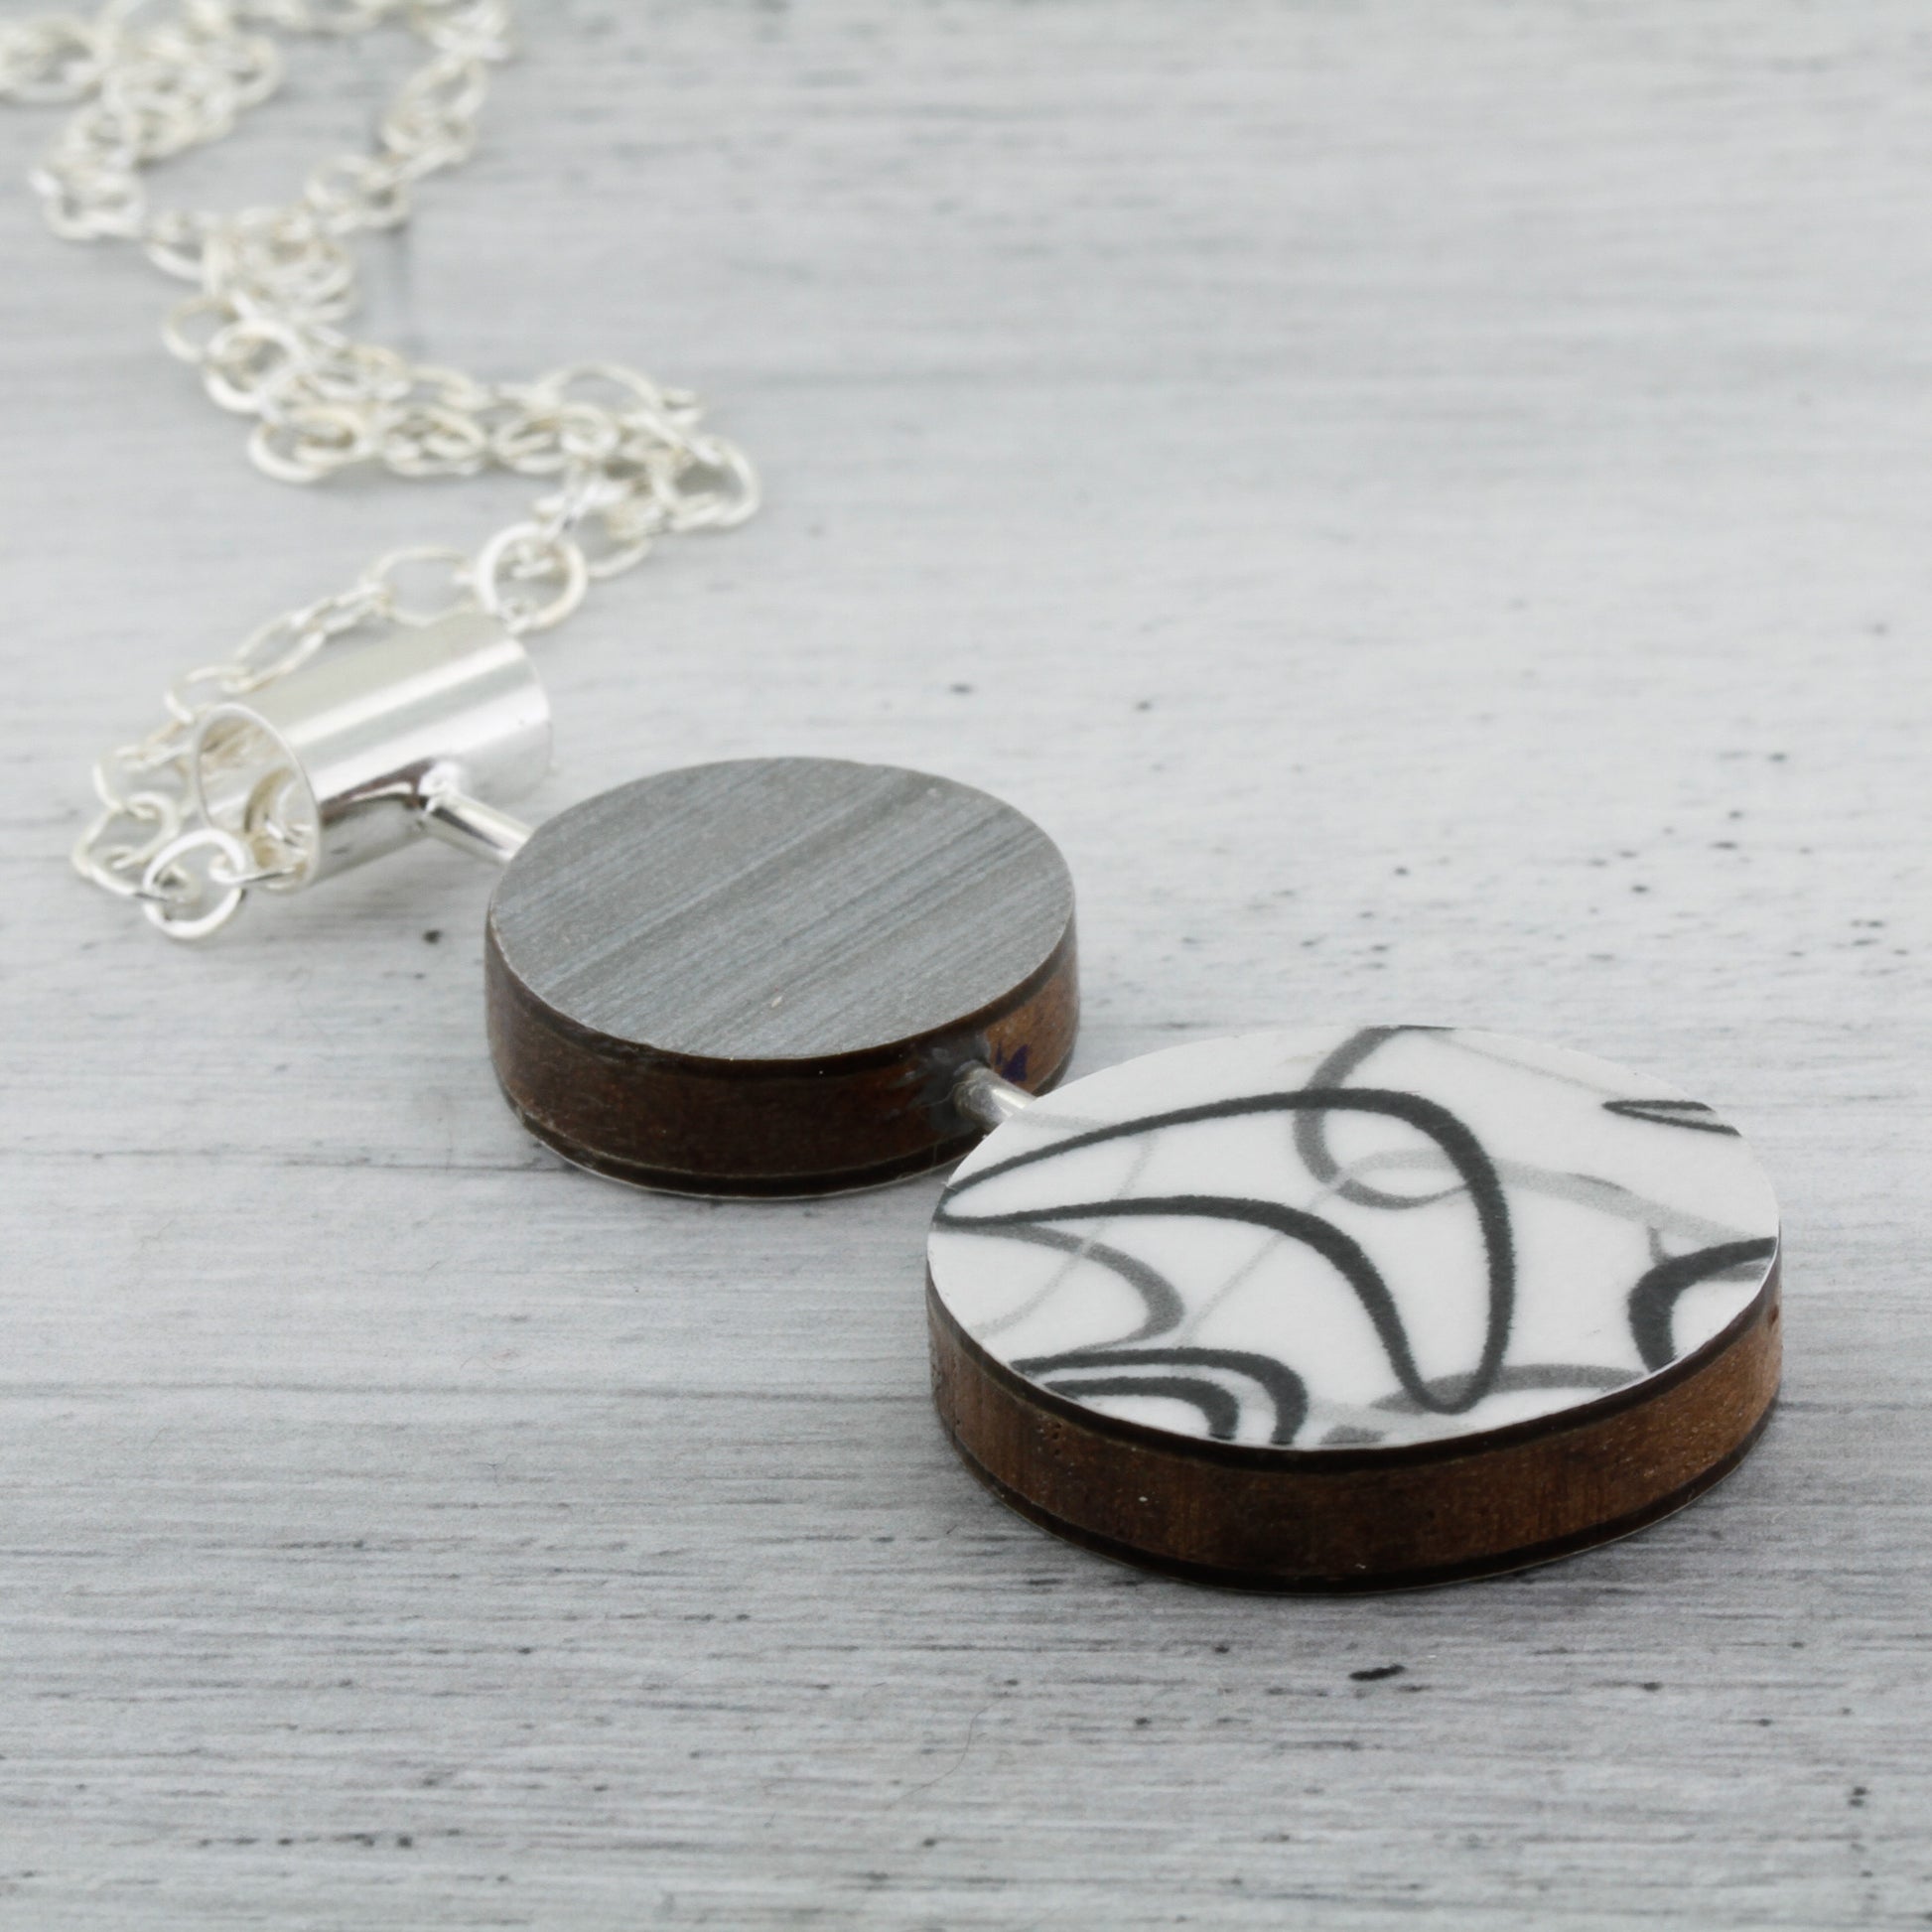 Contemporary art jewelry with laminate on wood boomerang pattern